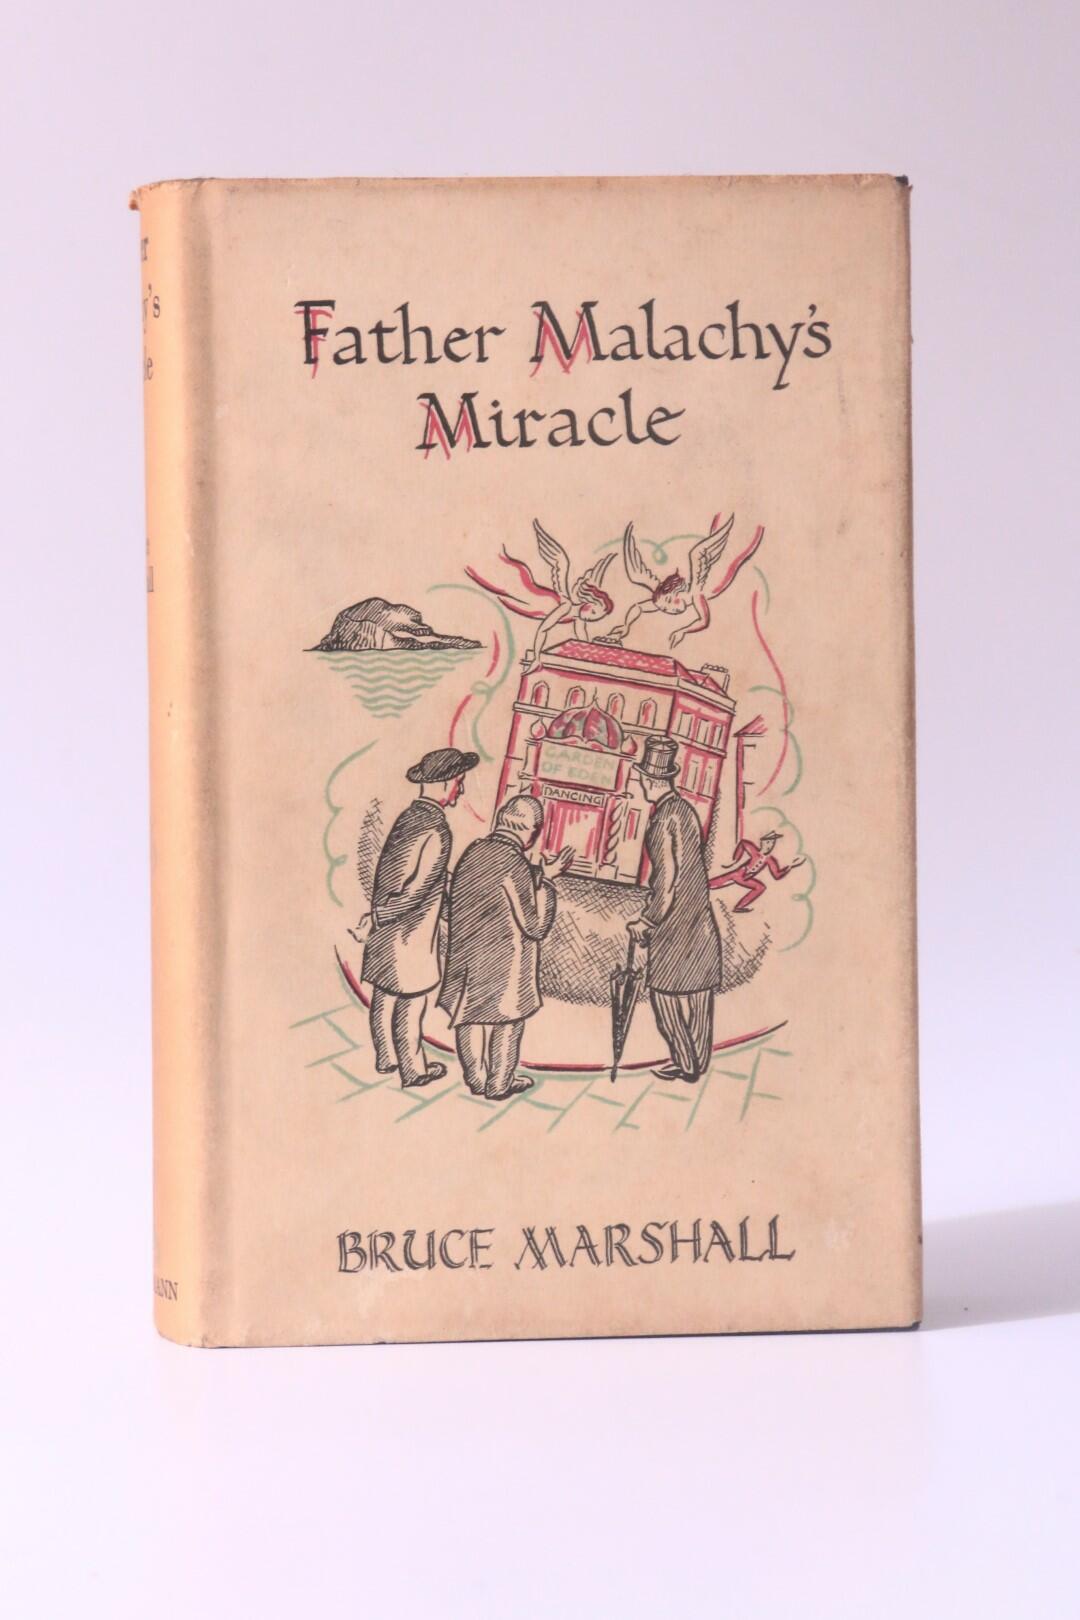 Bruce Marshall - Father Malachy's Miracle - Heinemann, 1931, First Edition.